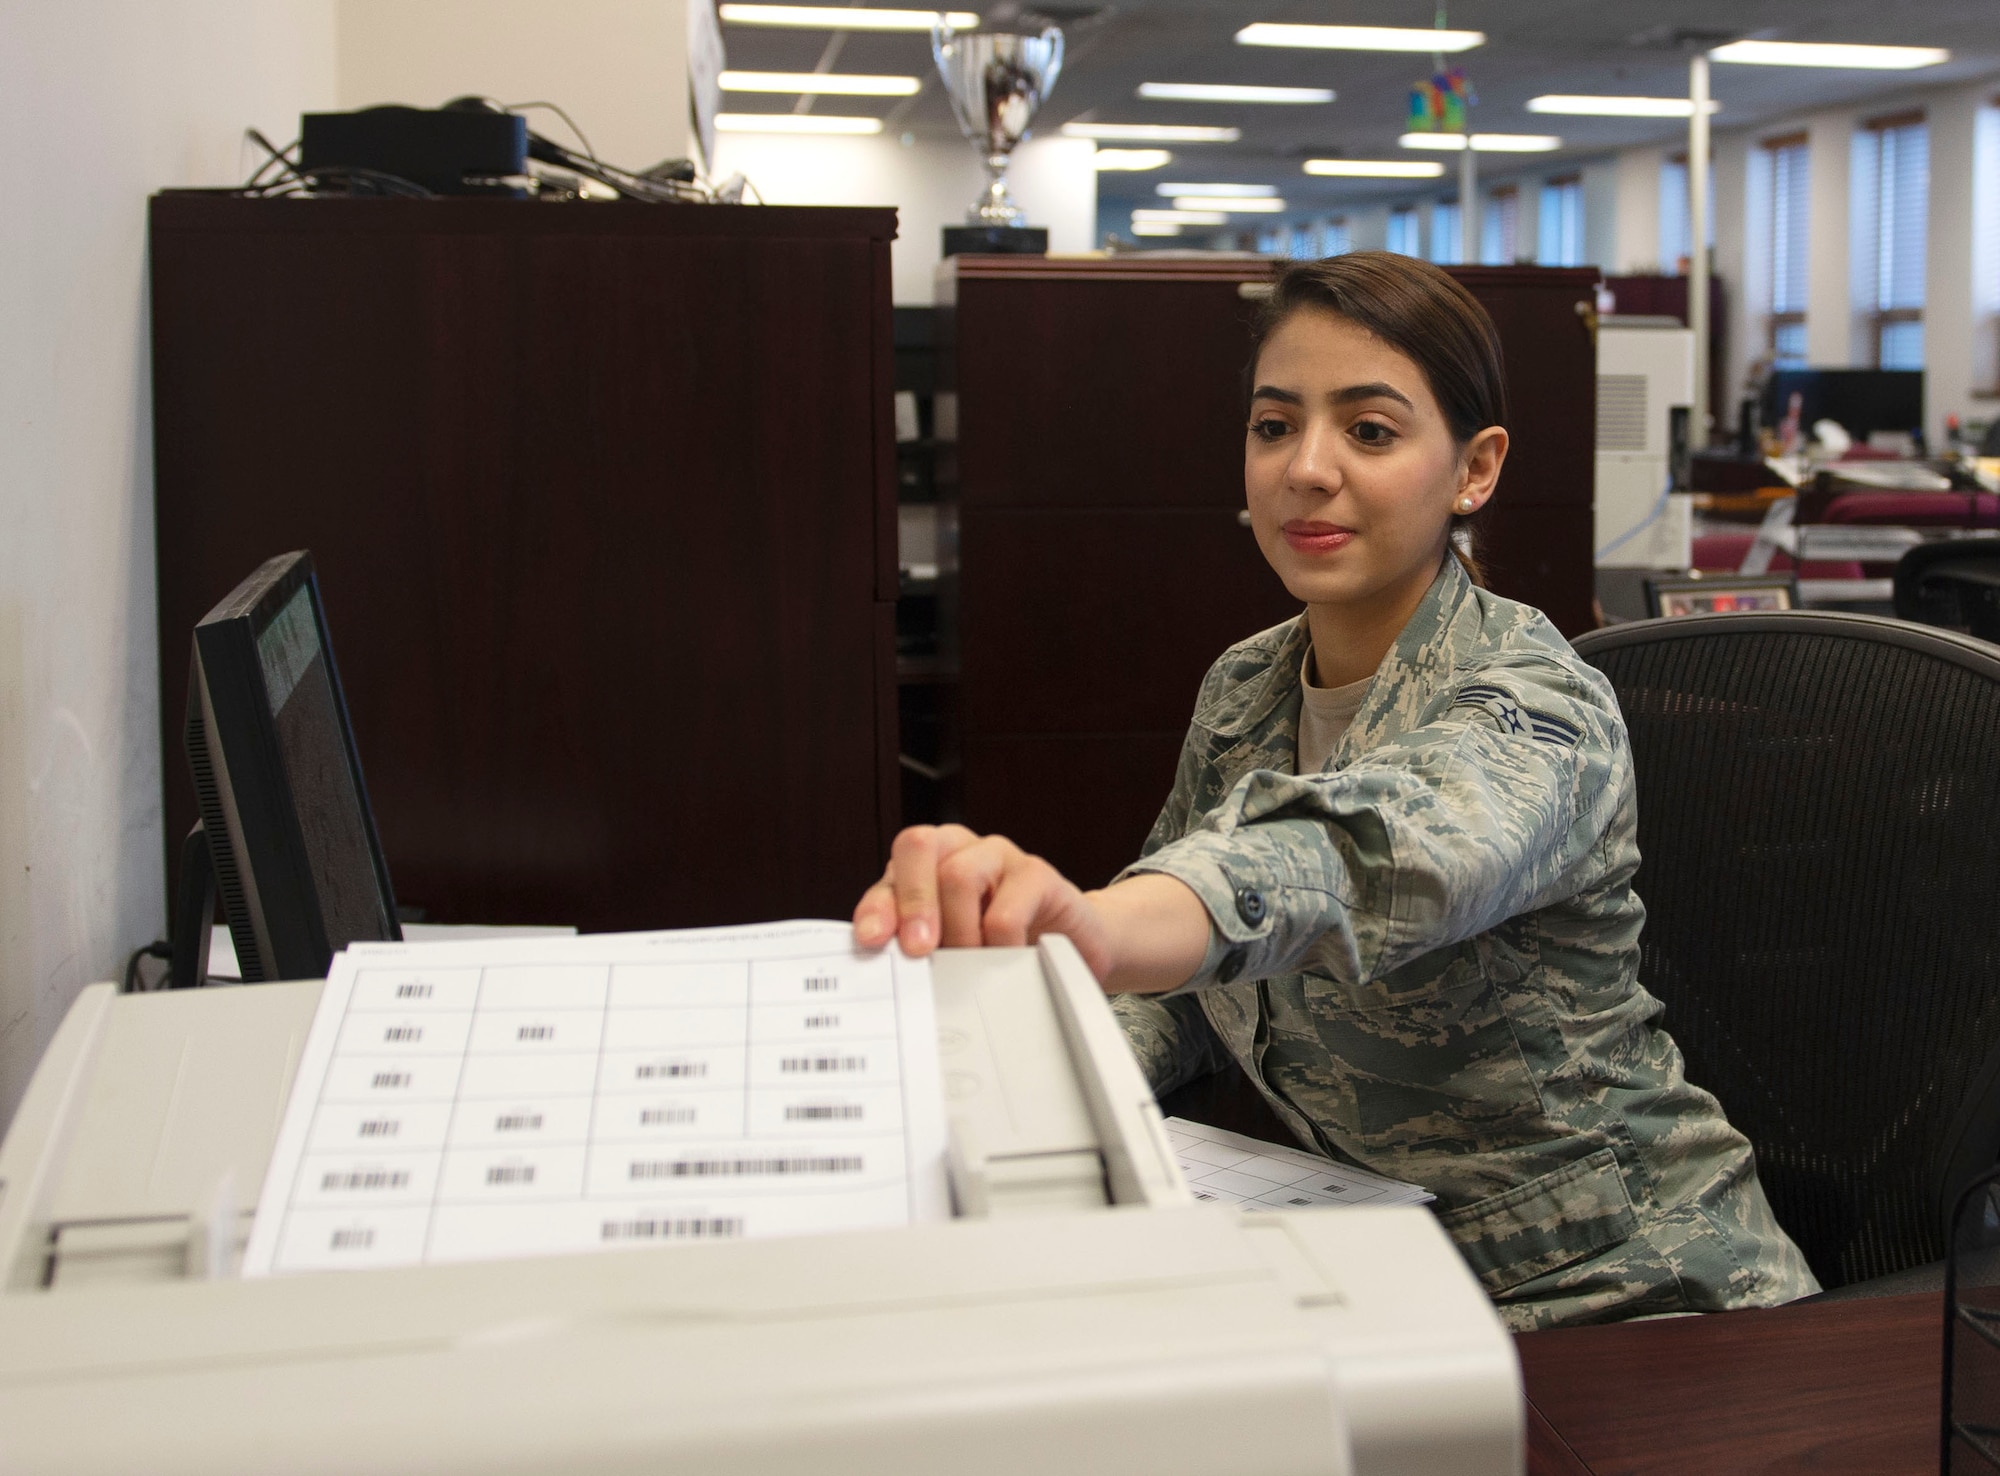 U.S. Air Force Senior Airman Ivonne Munoz, 55th Comptroller Squadron finance technician, demonstrates using EPHESOFT software Jan. 17, 2019, at Offutt Air Force Base, Nebraska. Using the software, travel vouchers are now transmitted within minutes to Air Force Financial Services Center at Ellsworth Air Force Base, South Dakota, instead of hours. (U.S. Air Force photo by L. Cunningham)